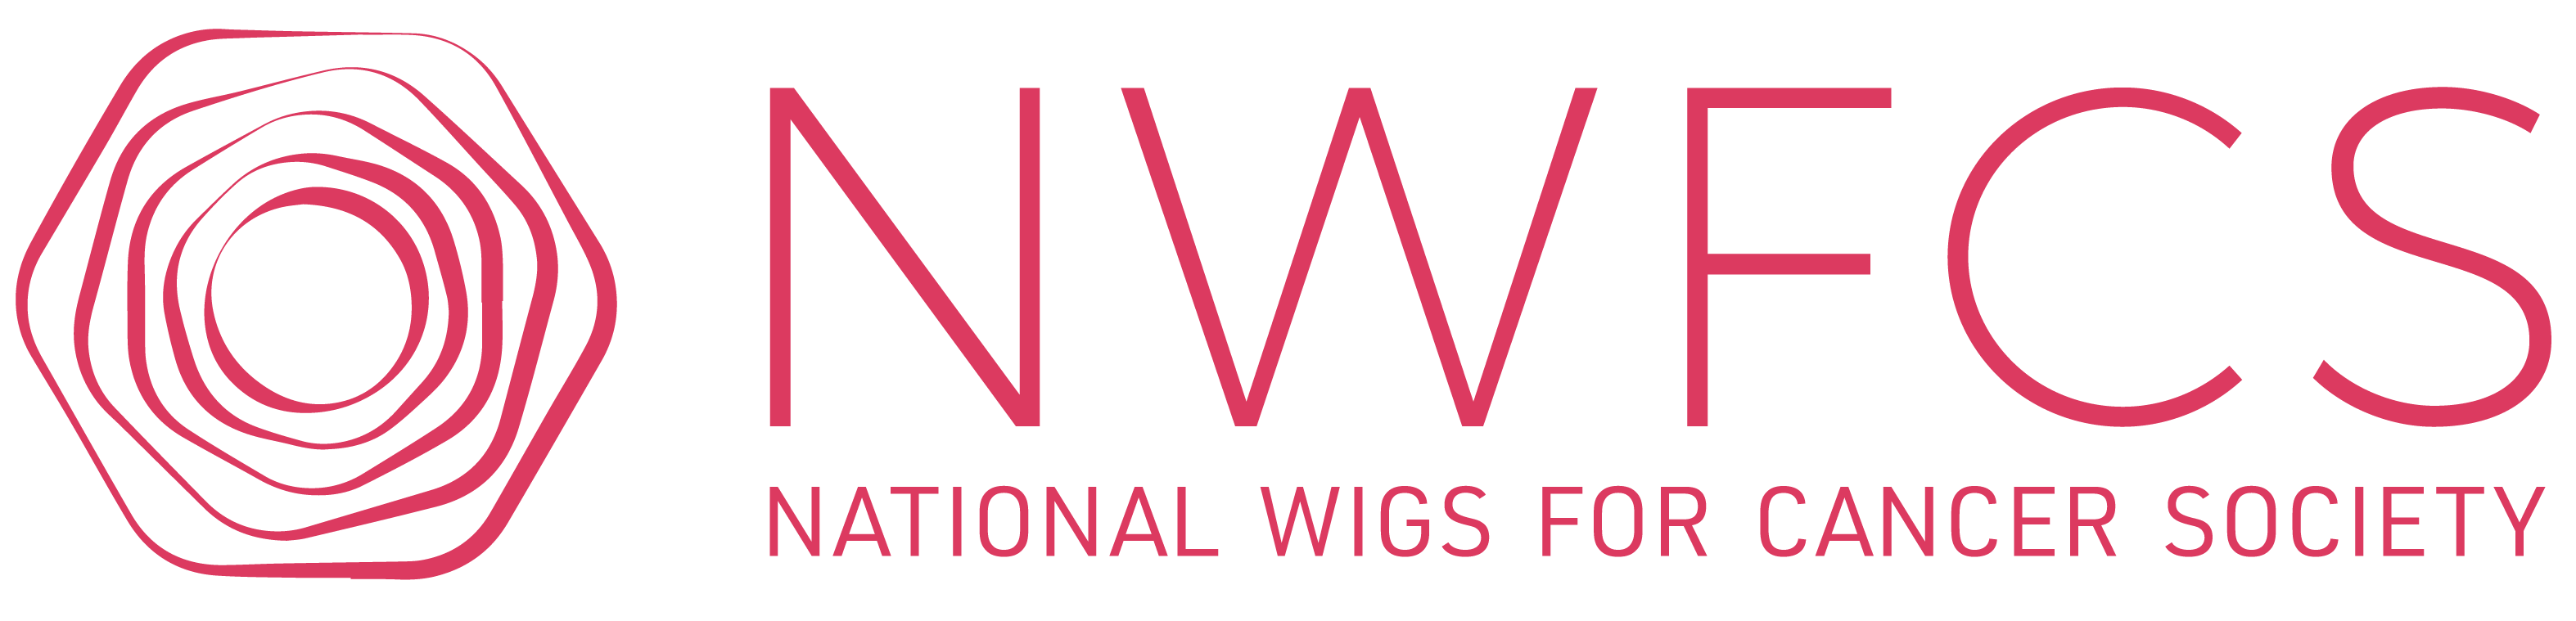 National Wigs for Cancer Society